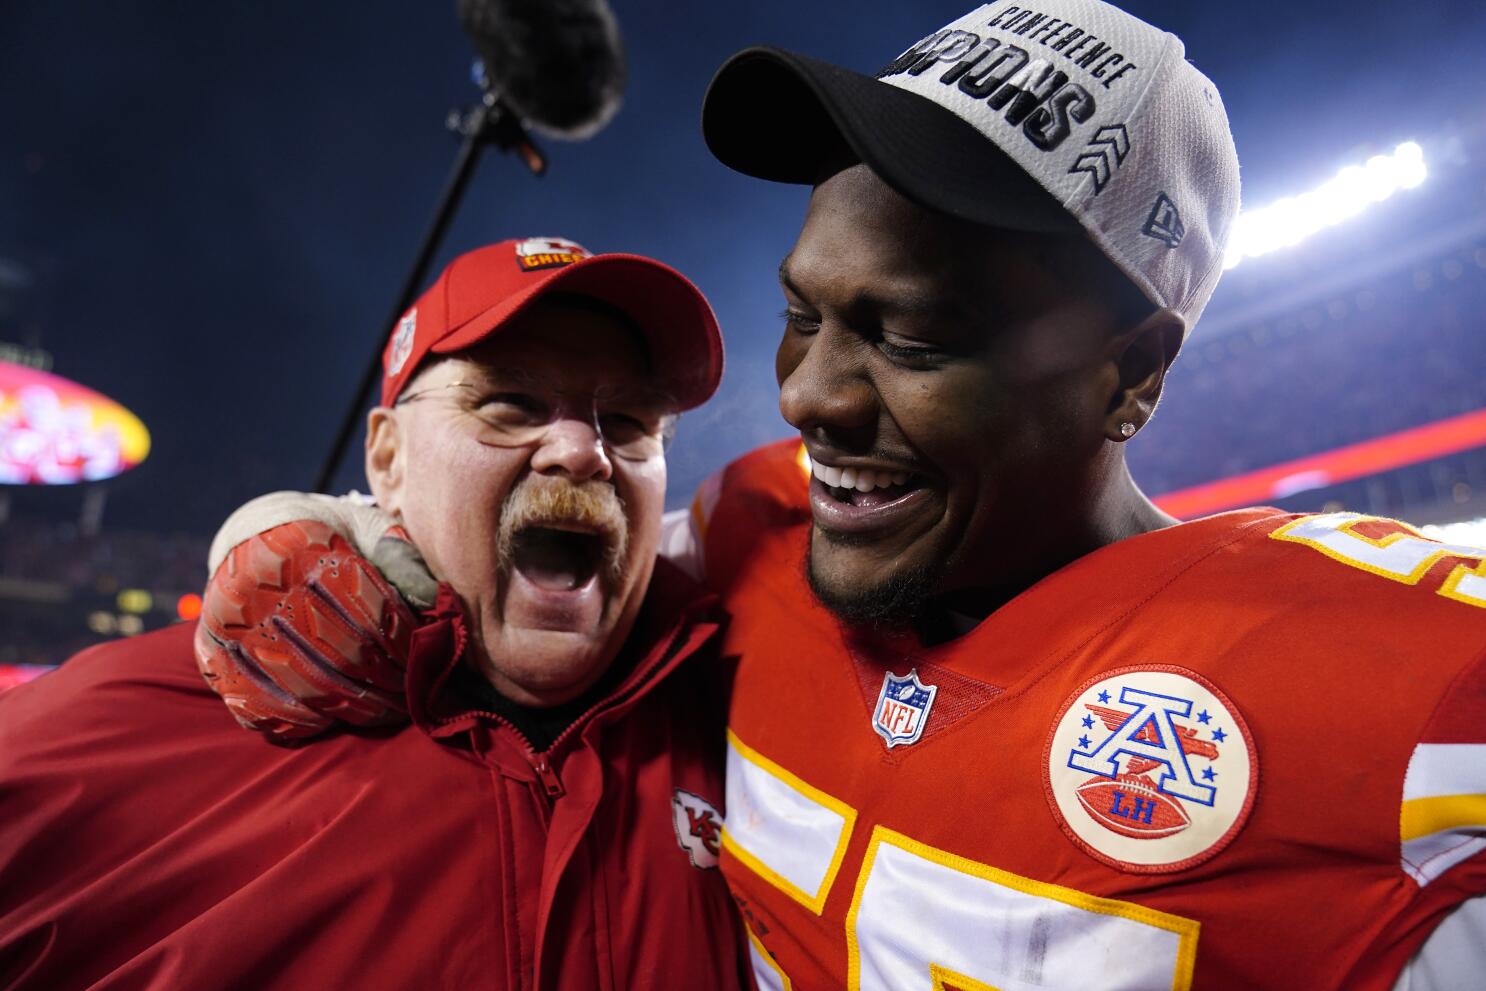 NFL playoffs: Chiefs, Bengals, Eagles and 49ers - meet the teams battling  it out to reach Super Bowl LVII in Arizona, NFL News